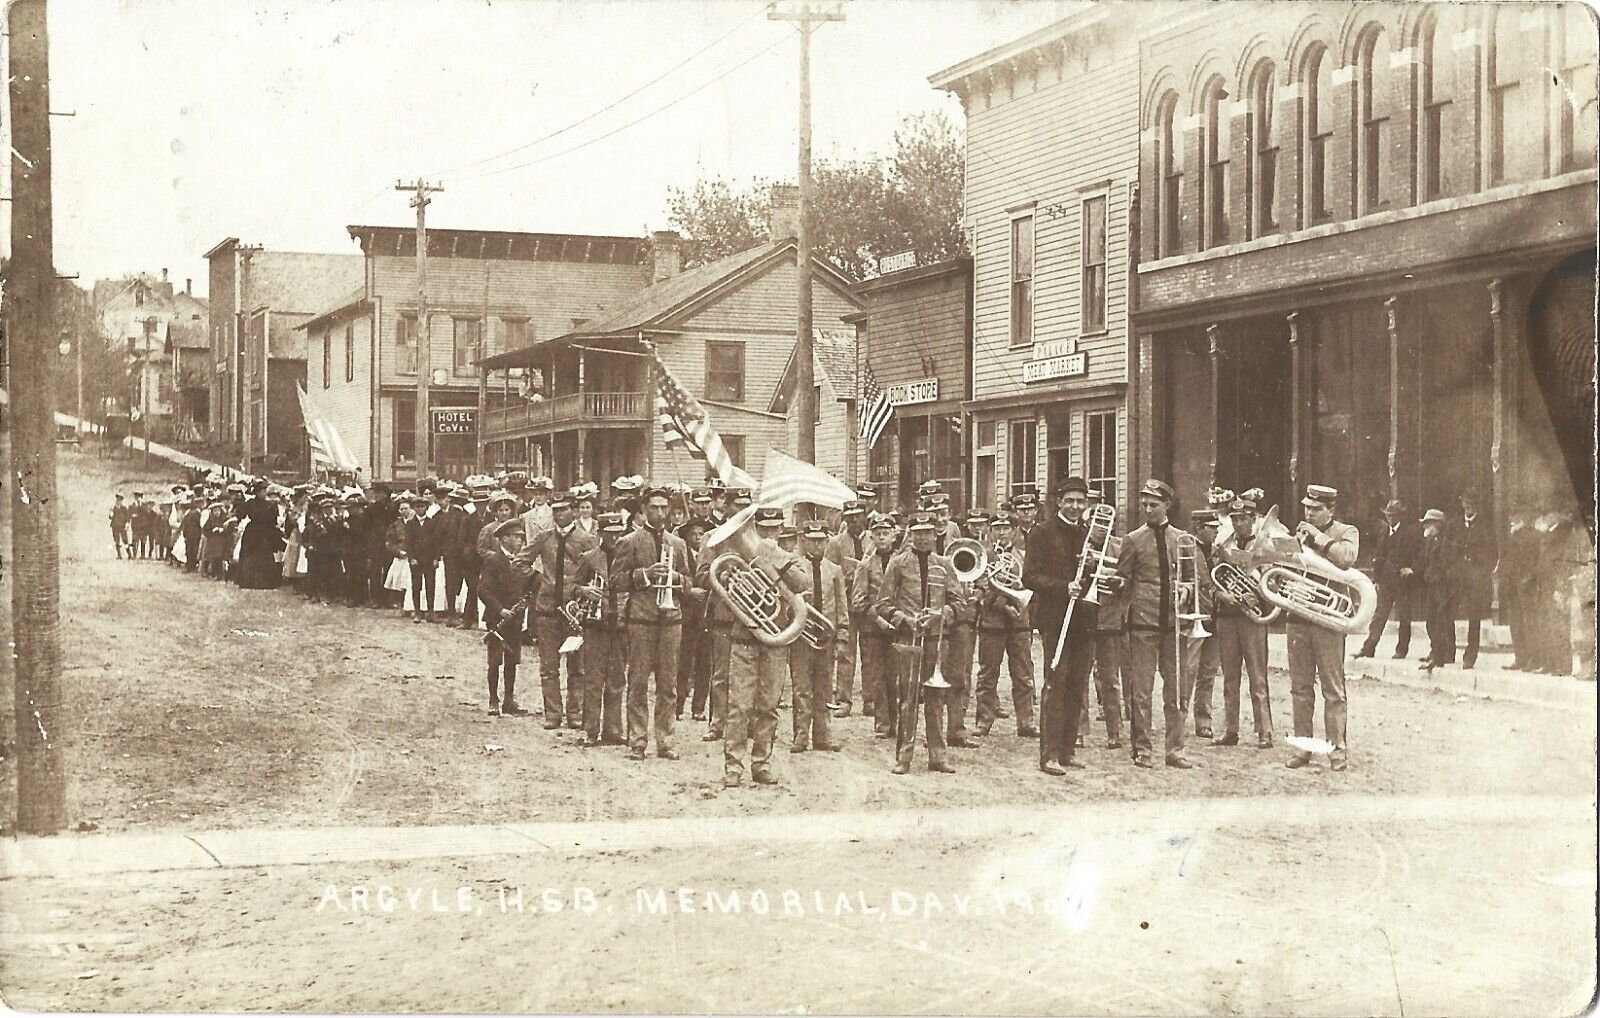 Argyle WI -- High School Band, 1907 Memorial Day Parade, store fronts; nice RPPC